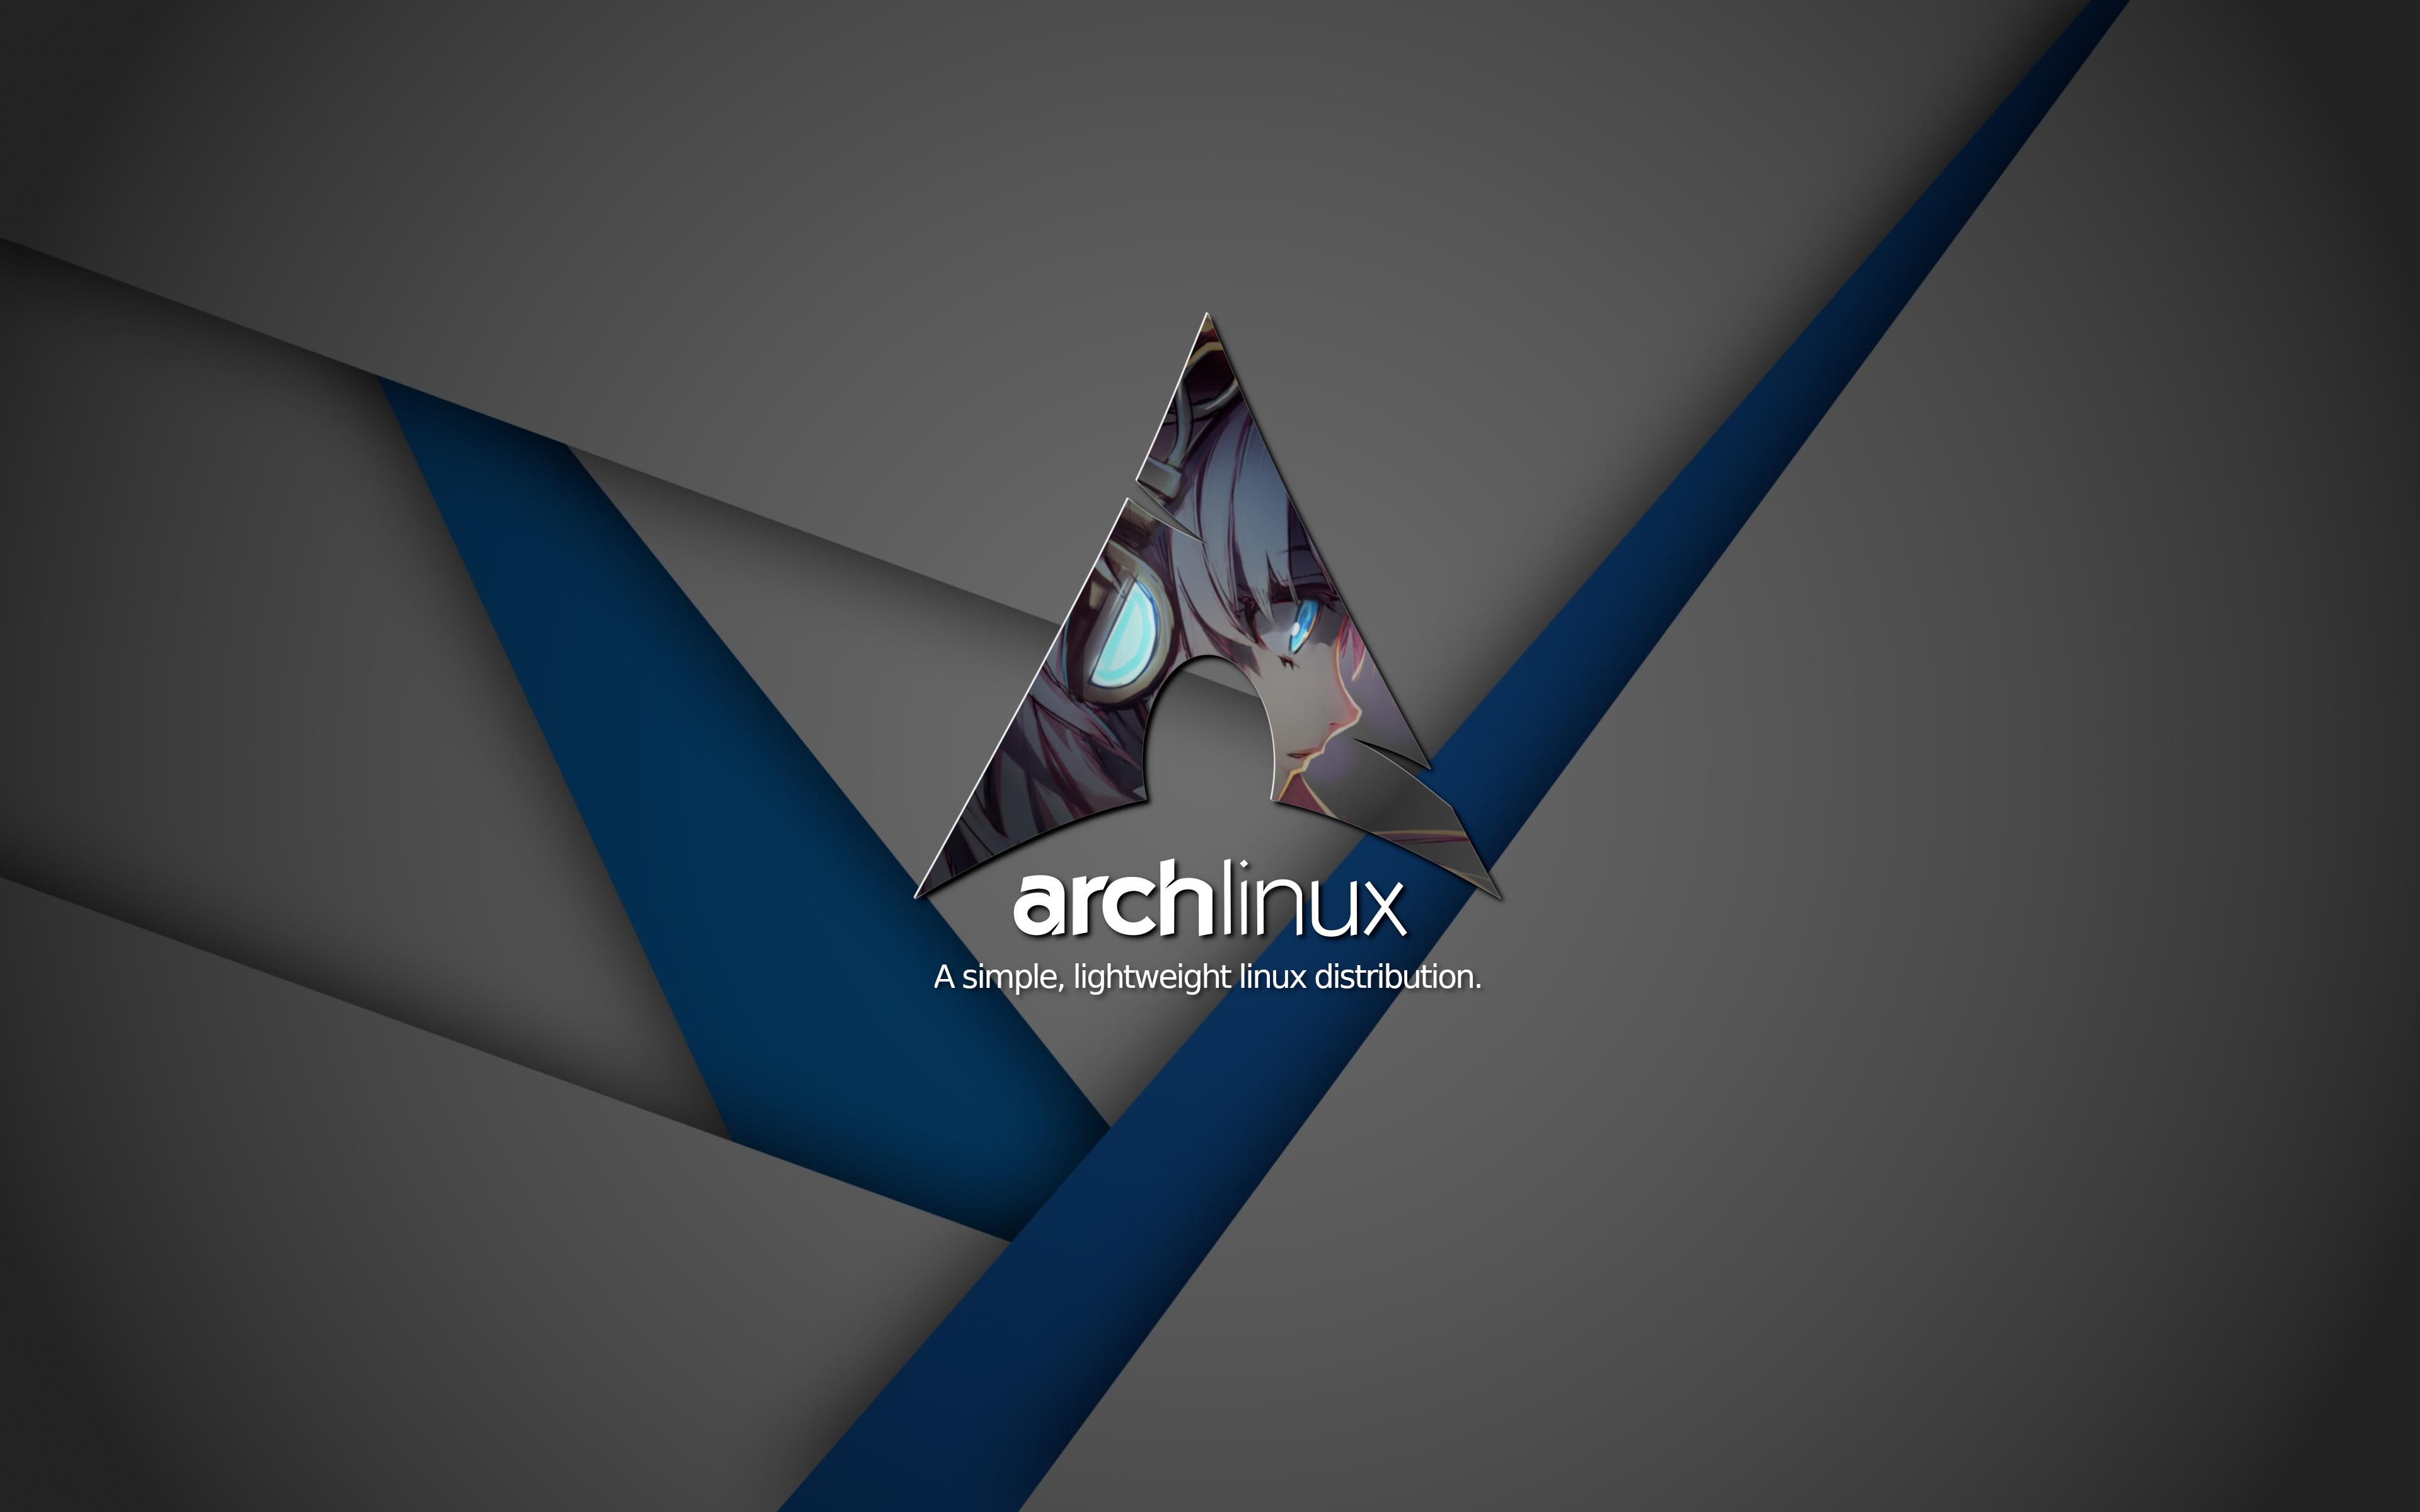 I know this is not everyones taste, but i thought i'll share my Wallpaper for Arch